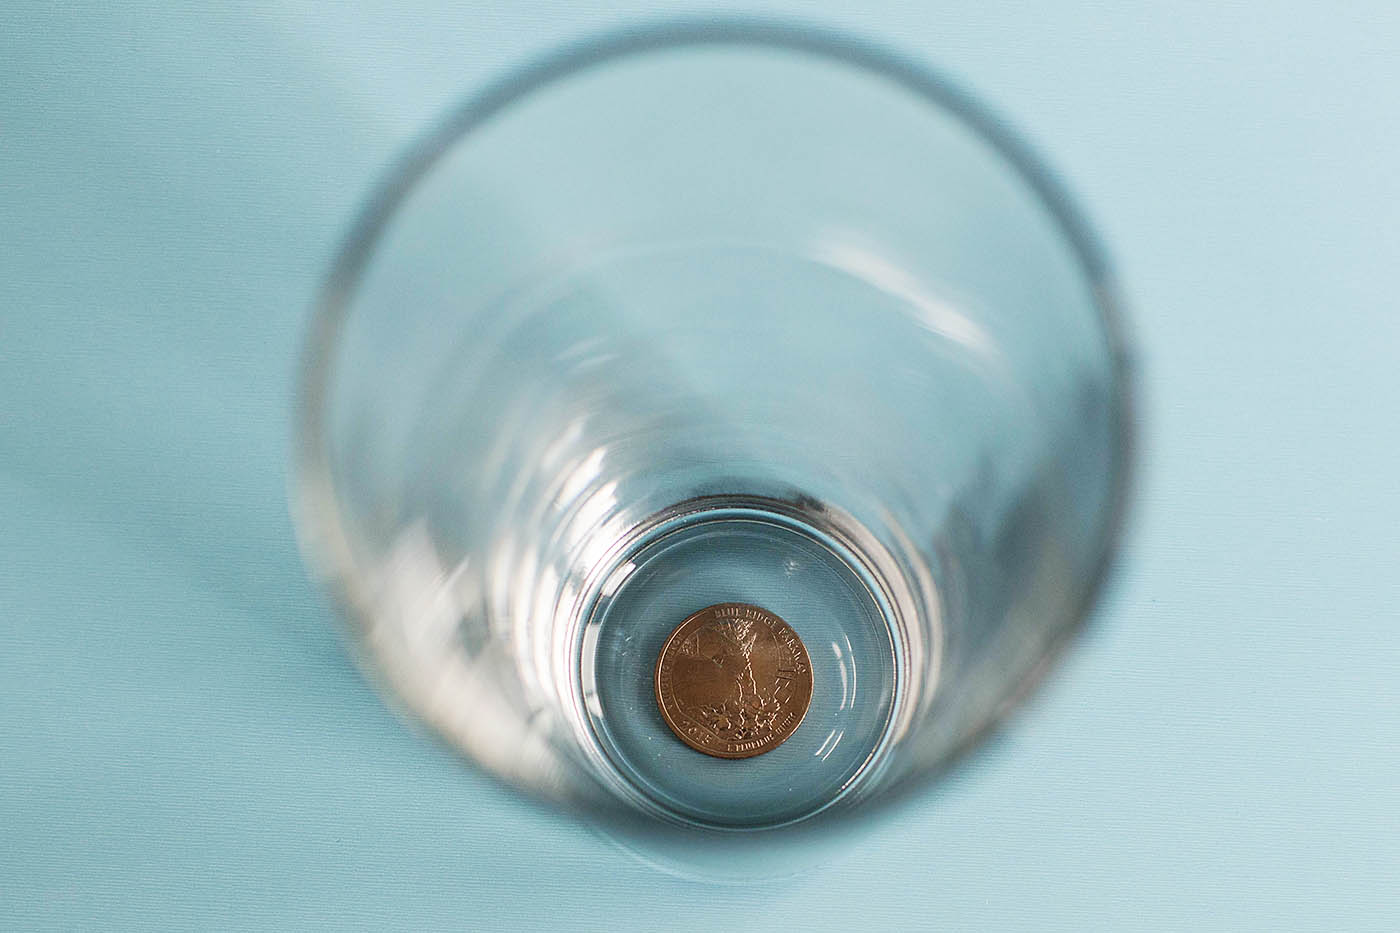 Disappearing (and reappearing) coin trick! So easy you could show the kids tonight!